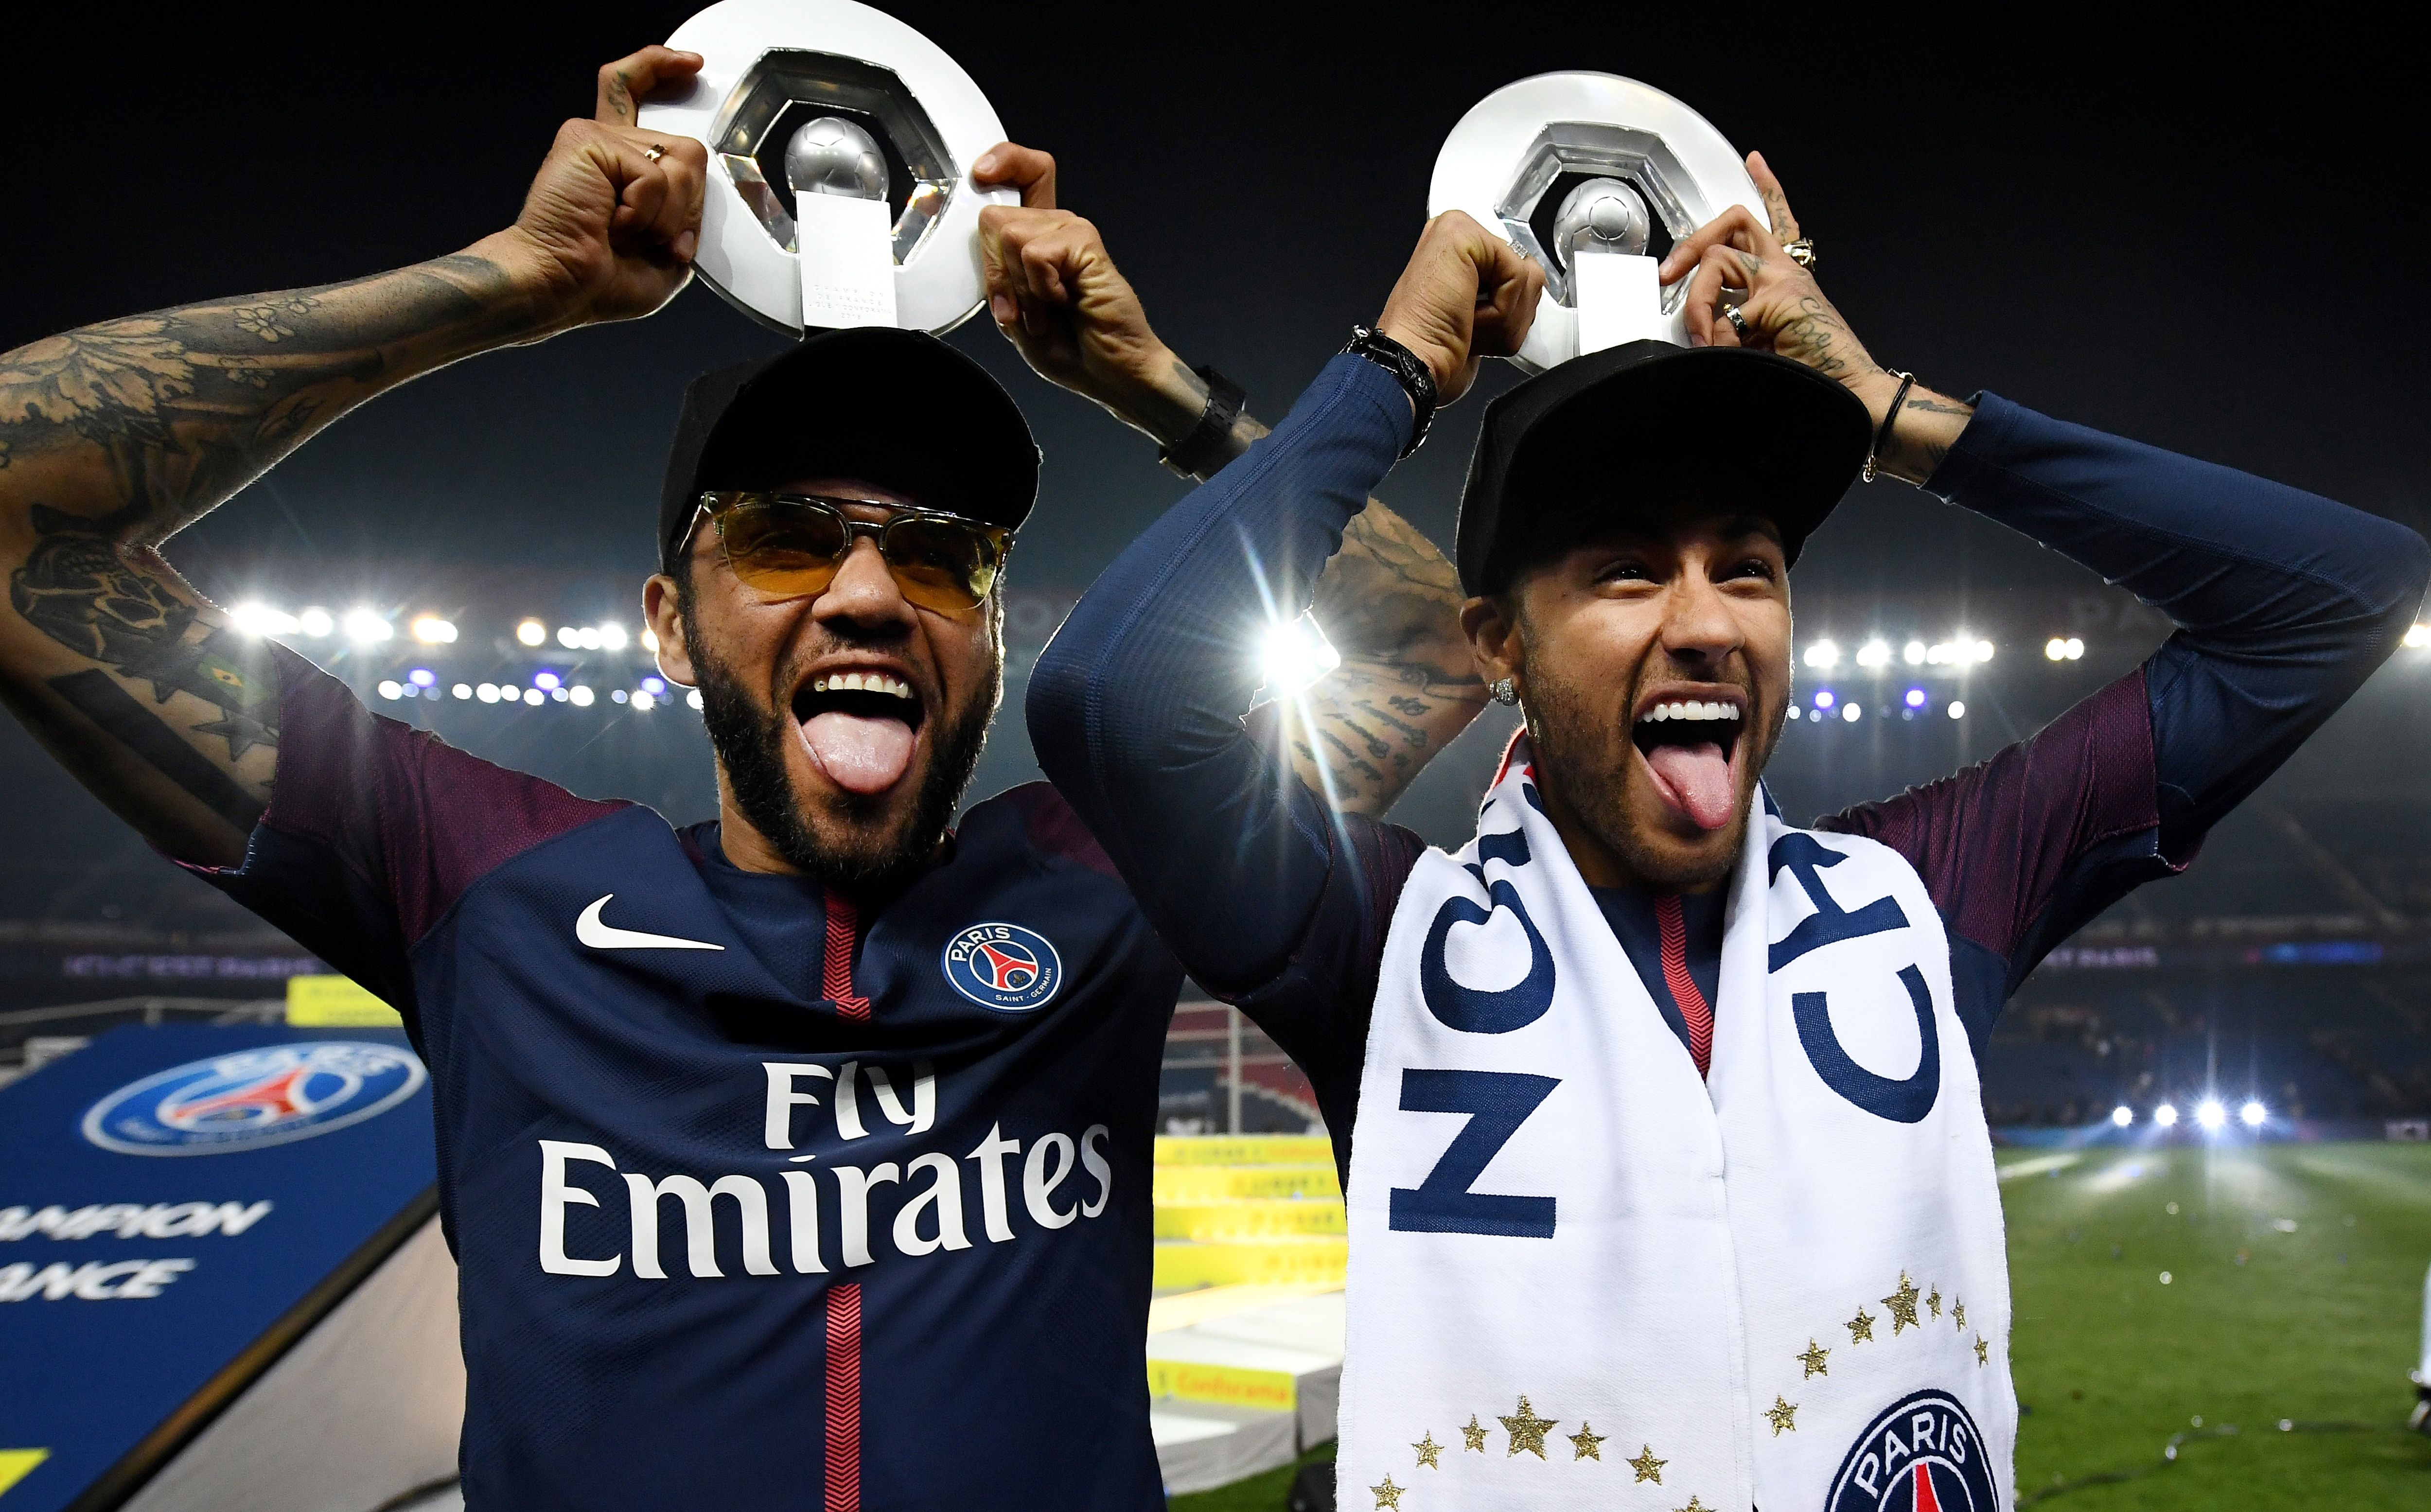 Paris Saint-Germain's Brazilian defender Dani Alves (L) and Paris Saint-Germain's Brazilian forward Neymar joke after winning the French L1 title at the end of the French L1 football match Paris Saint-Germain (PSG) vs Rennes on May 12, 2018 at the Parc des Princes stadium in Paris. (Photo by FRANCK FIFE / AFP)        (Photo credit should read FRANCK FIFE/AFP/Getty Images)